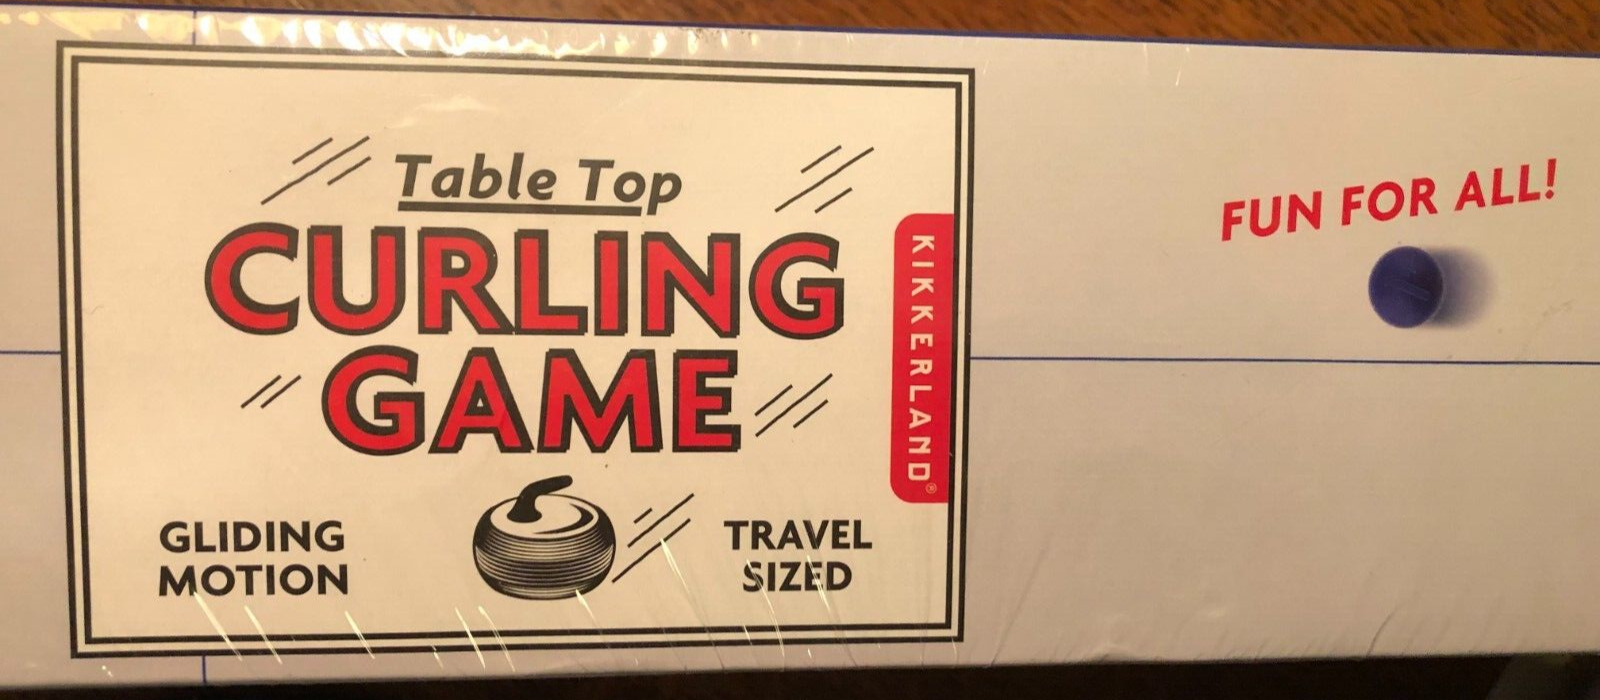 Kikkerland Table Top Curling Game Gliding Motion Travel Size NEW FACTORY SEALED! Без бренда - фотография #5